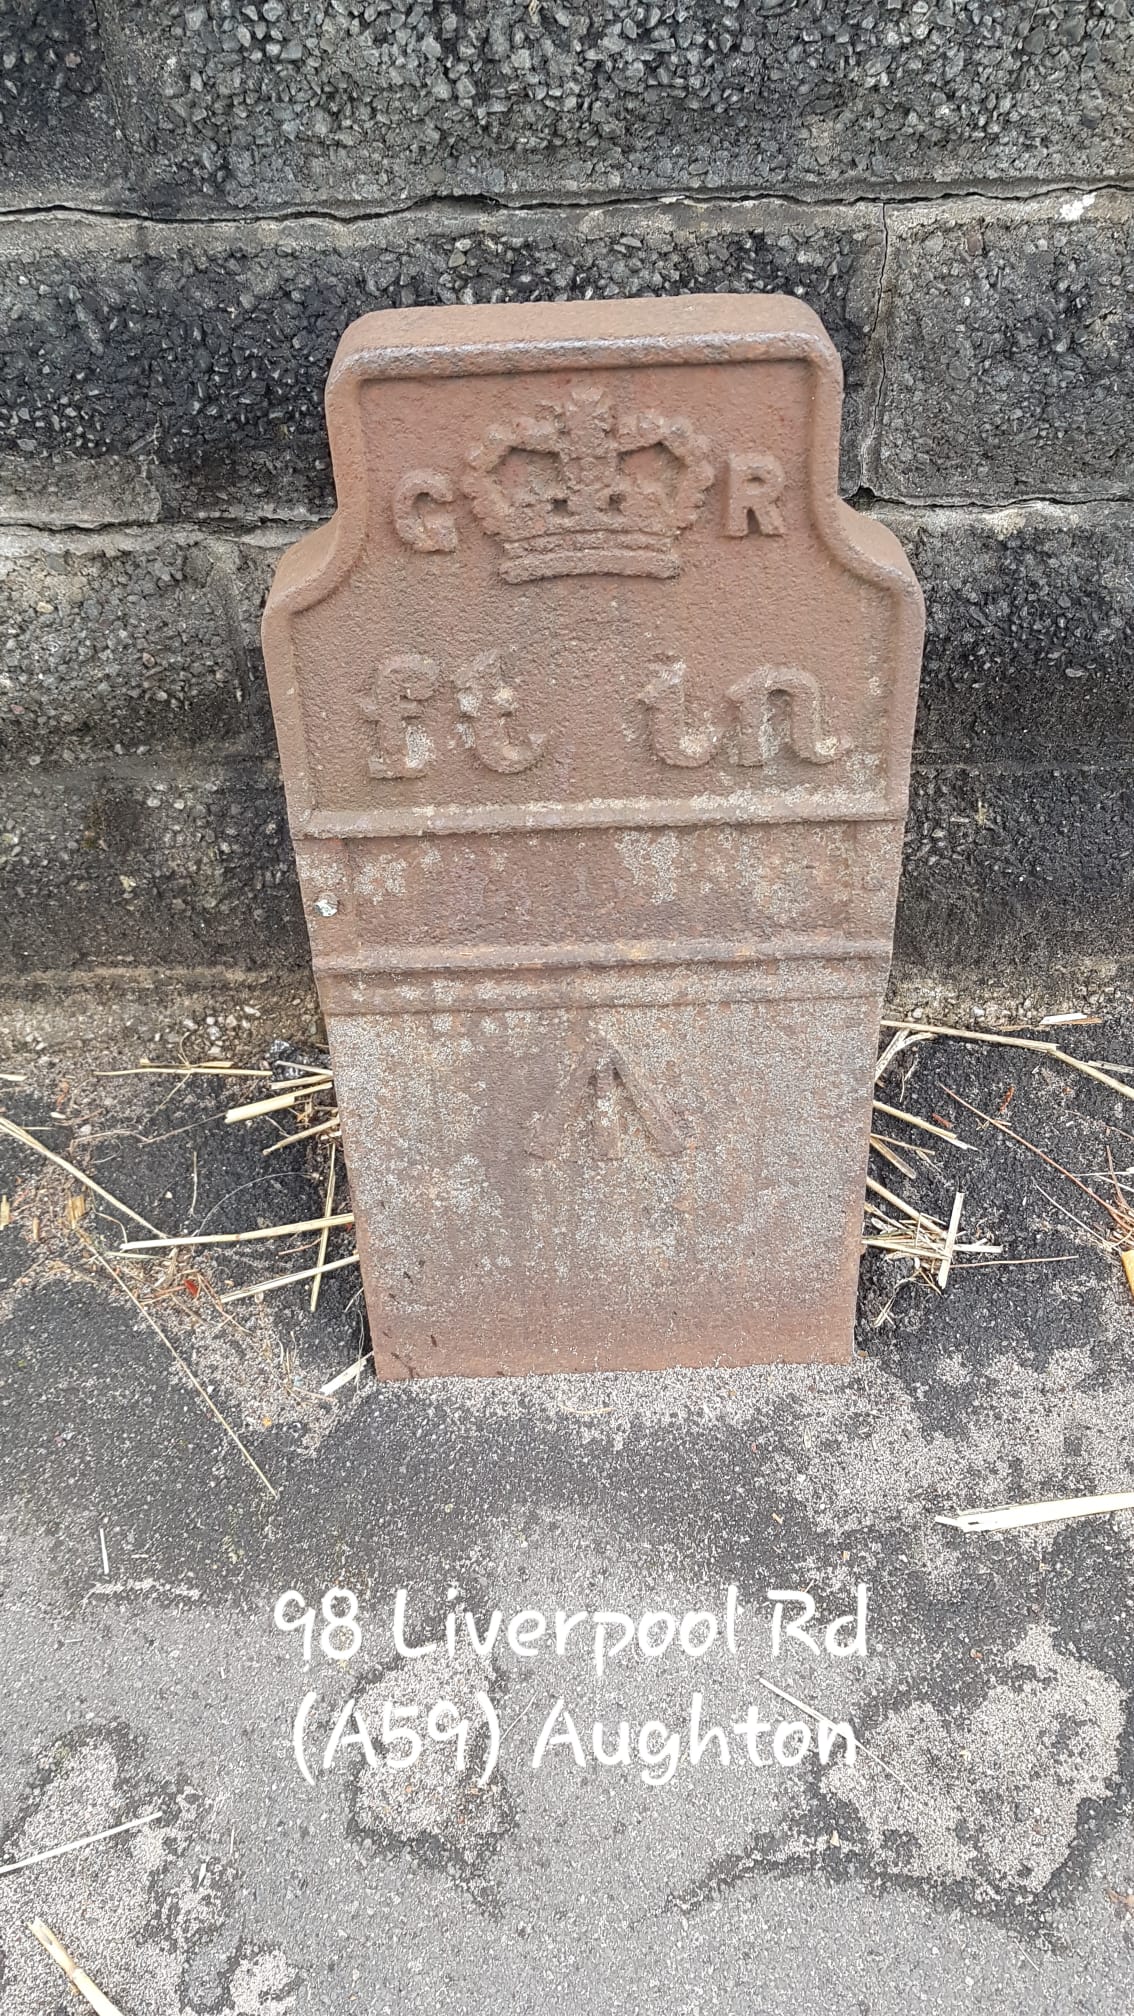 Telegraph cable marker post at 98 Liverpool Road, Aughton, Ormskirk by Jan Gibbons 